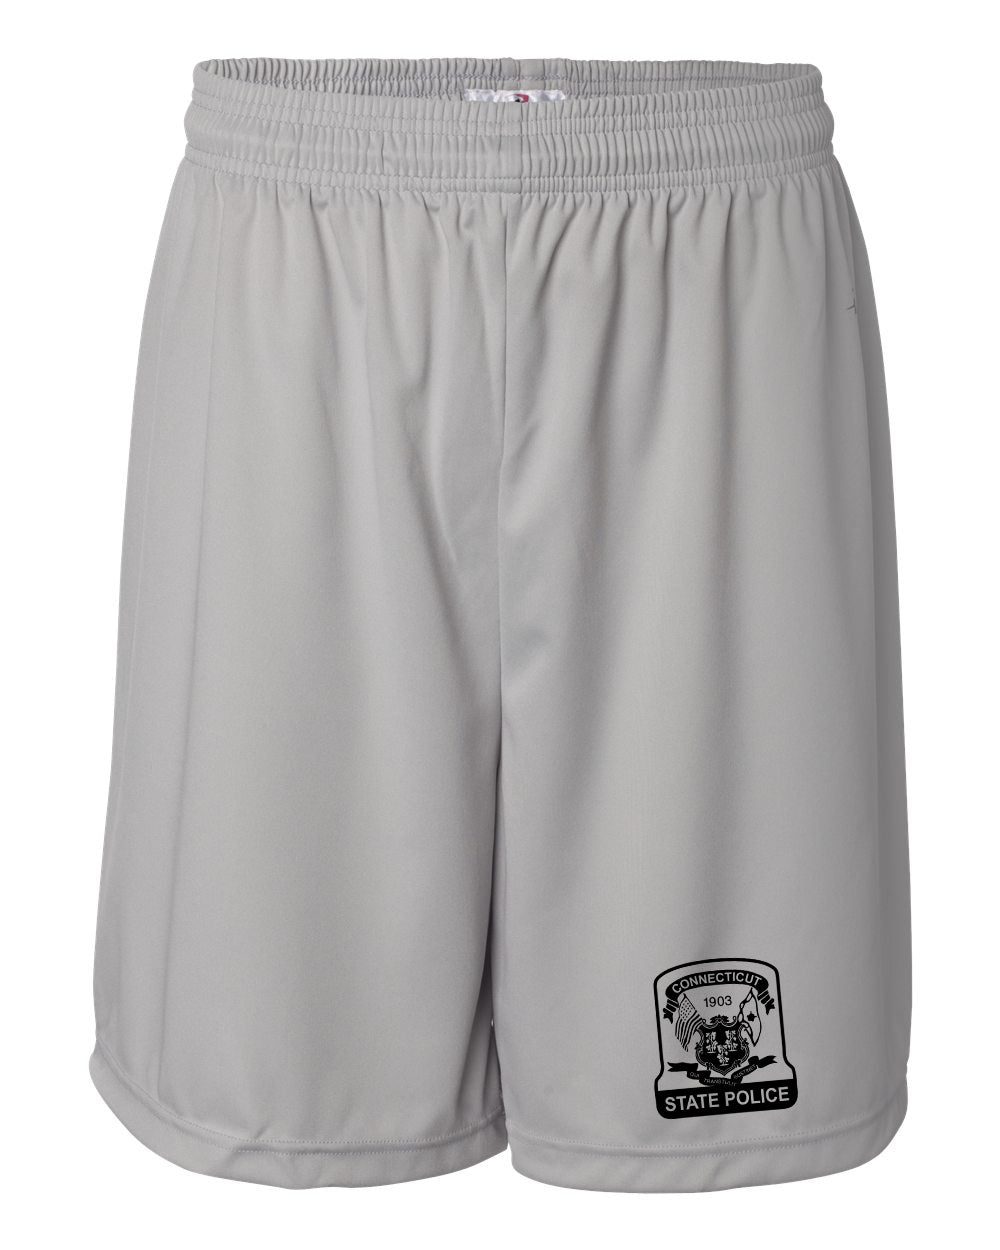 CTSP Adult Badger 7” Shorts "Shield" - 4107 (color options available)